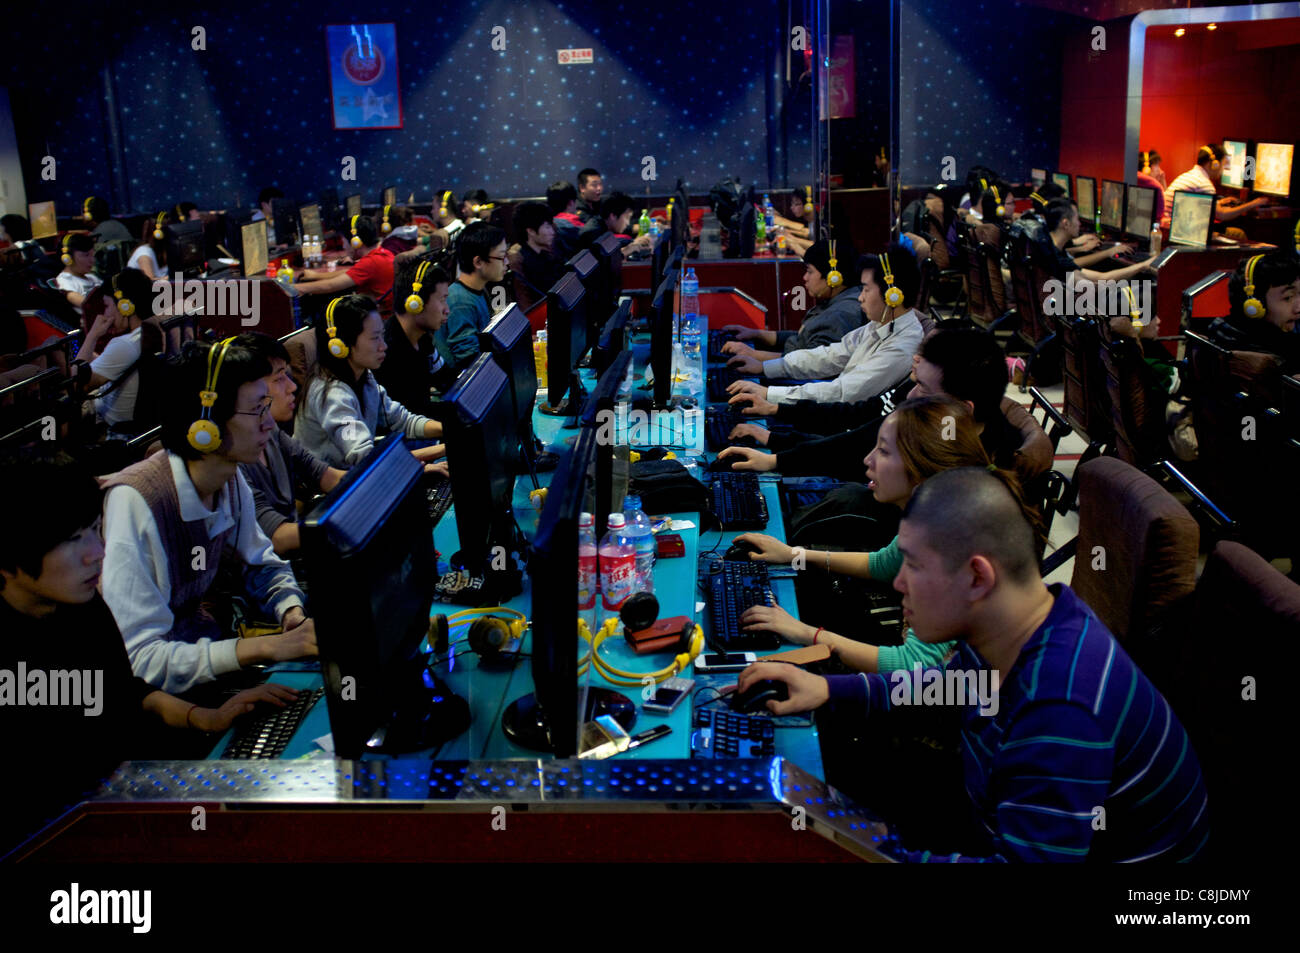 A packed internet cafe in Beijing, China. 24-Oct-2011 Stock Photo